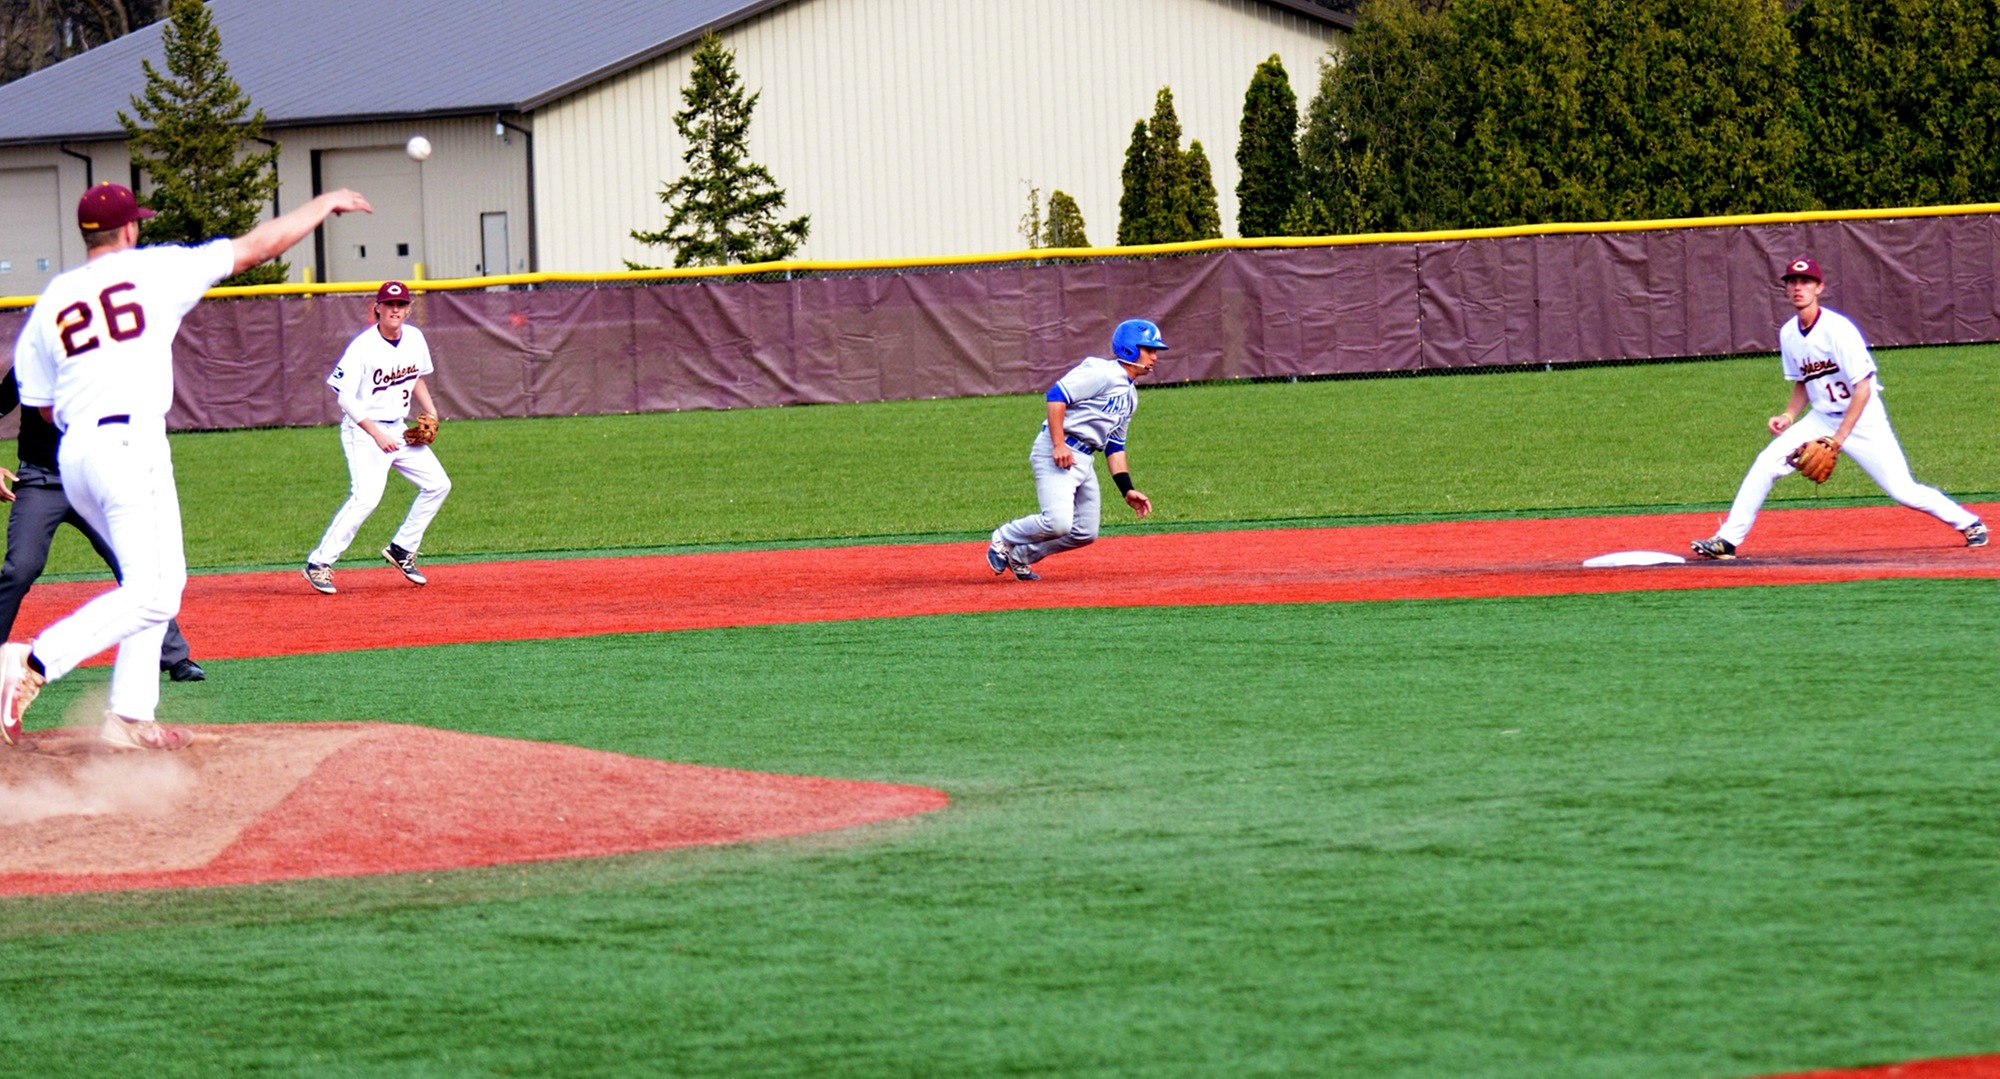 Cobber pitcher Turner Storm wheels and fires a pickoff throw to second baseman Nate Sillerud during the Cobbers' final non-conference game vs. Mayville State.